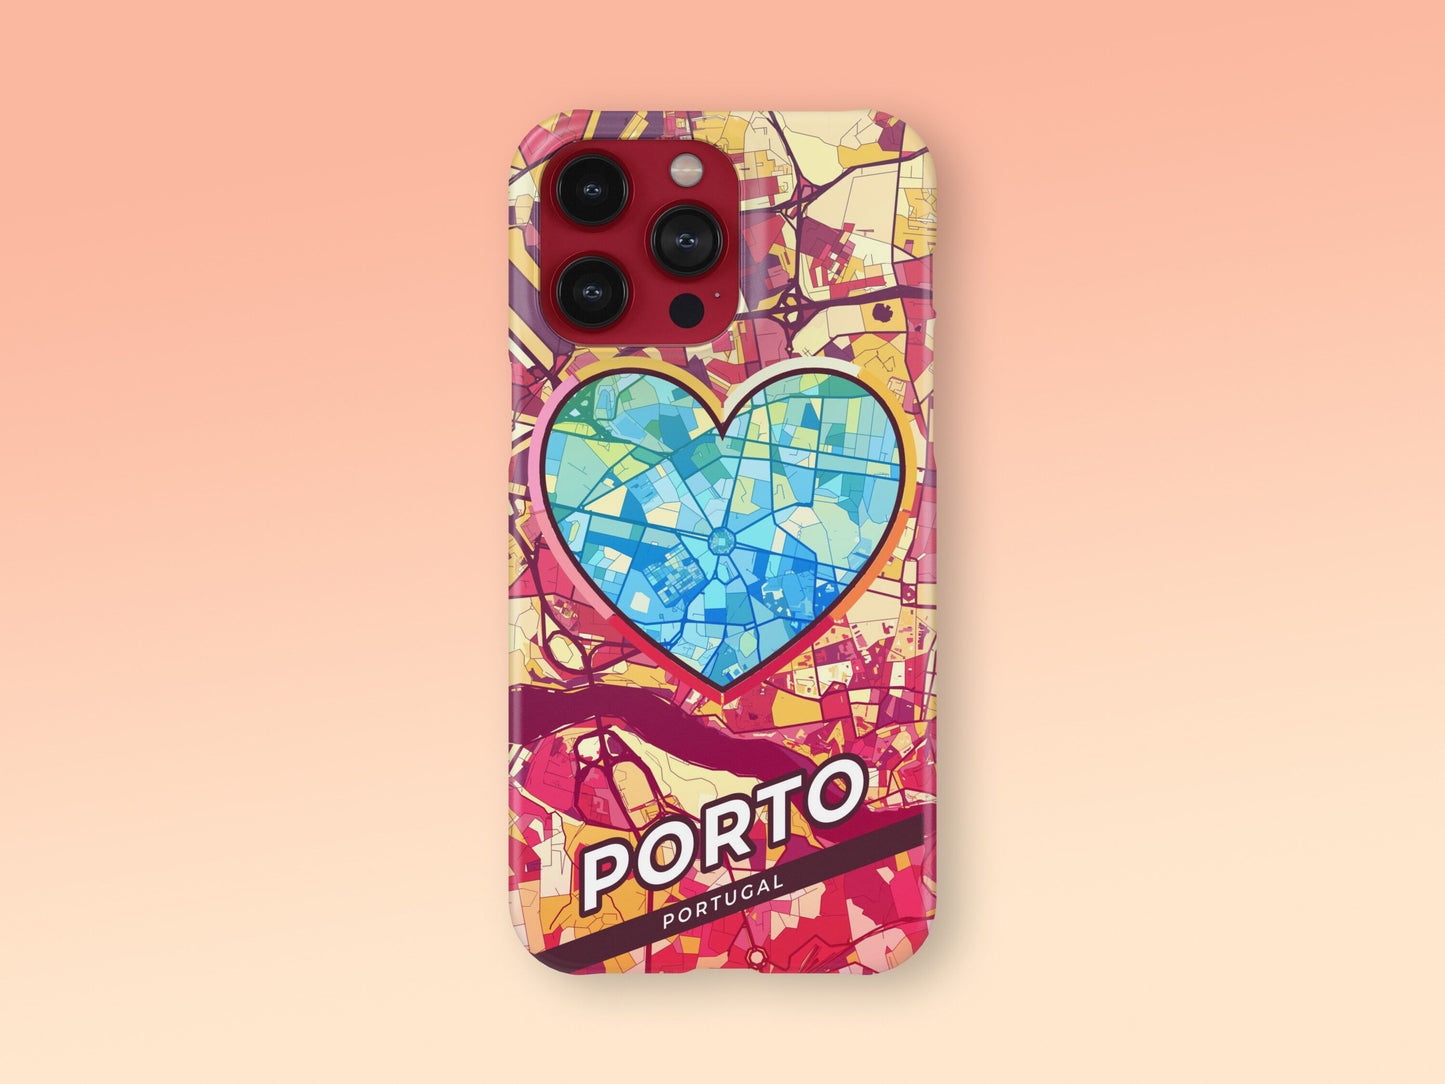 Porto Portugal slim phone case with colorful icon. Birthday, wedding or housewarming gift. Couple match cases. 2